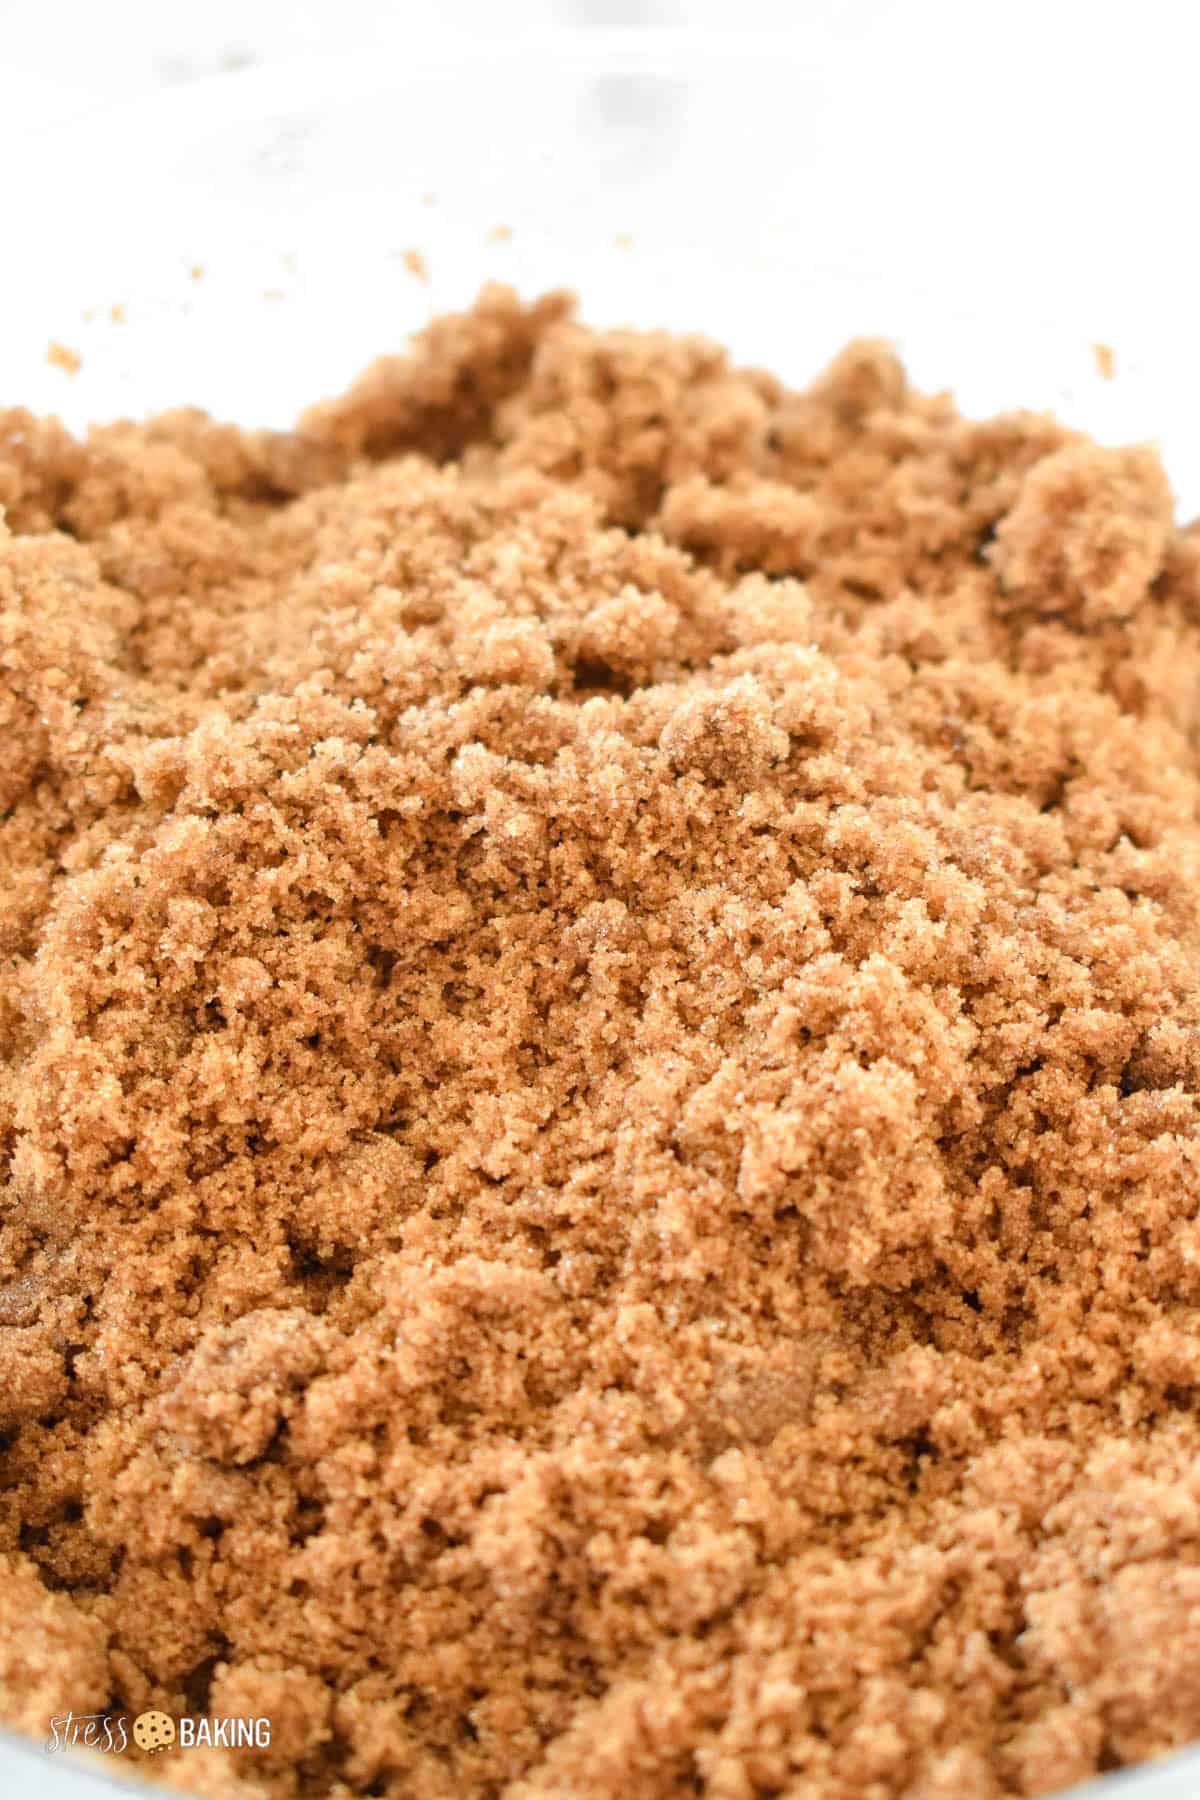 Clumped hardened brown sugar in a clear mixing bowl